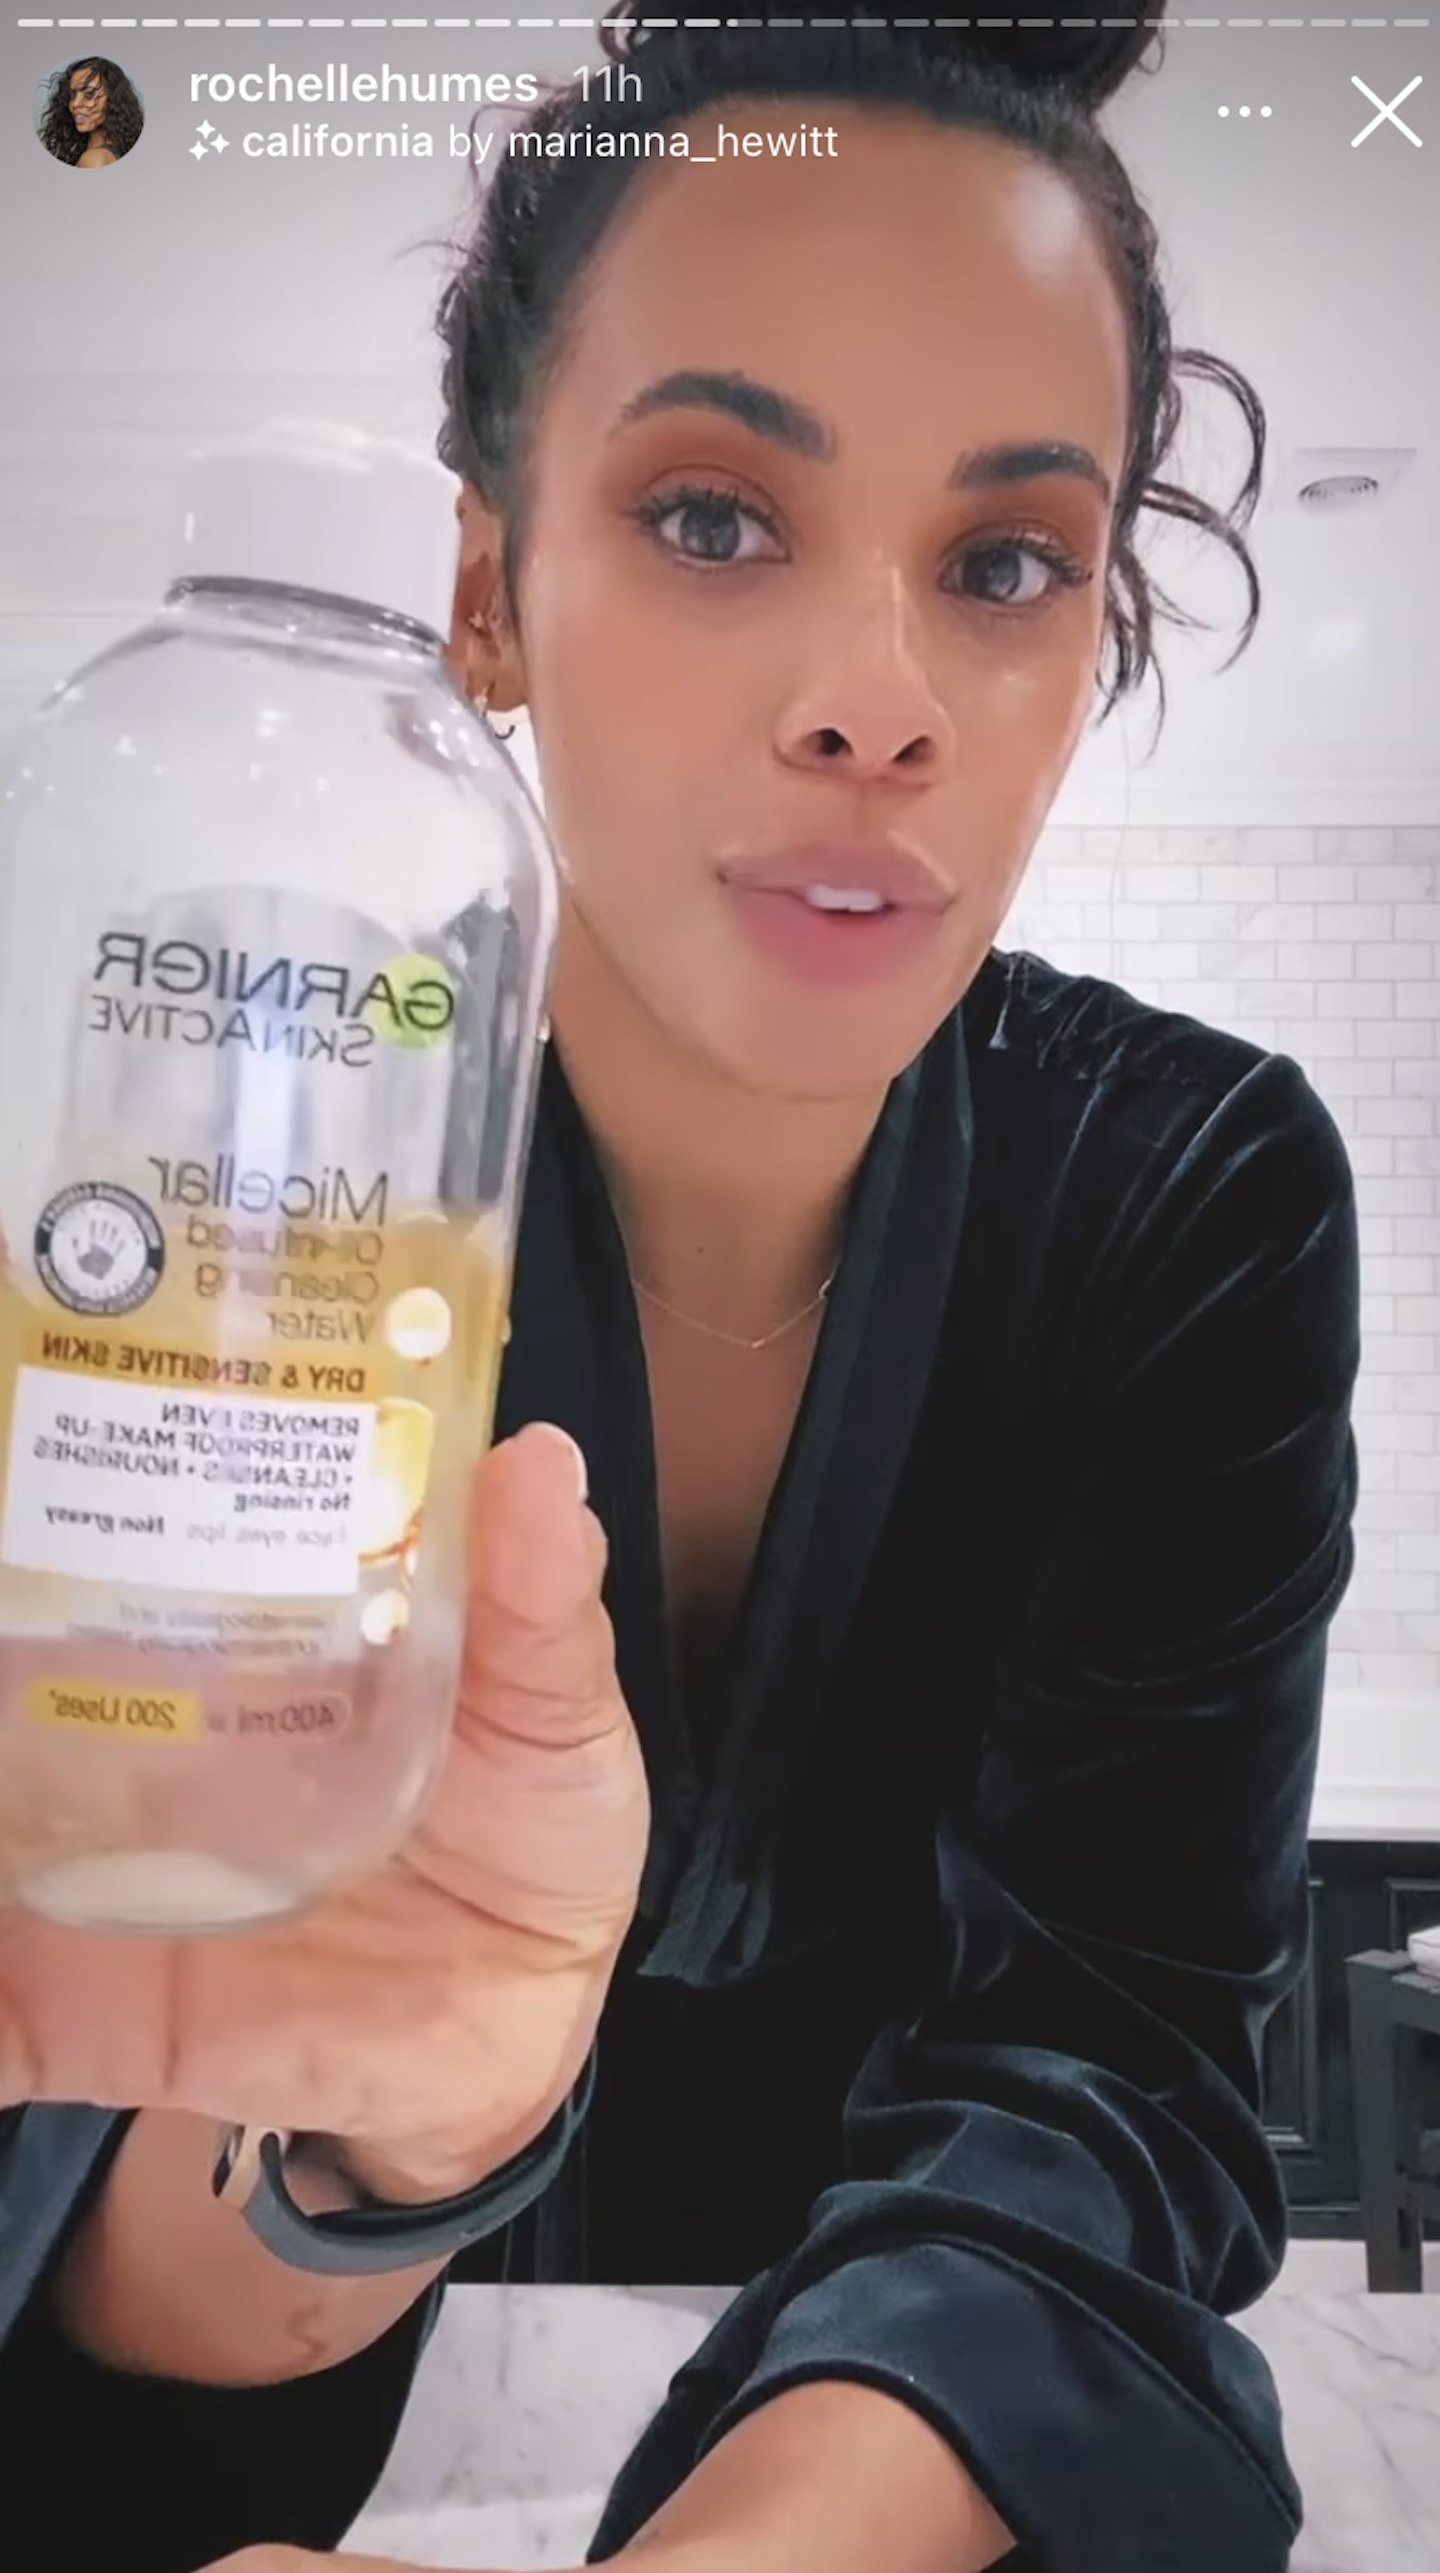 Rochelle Humes skincare